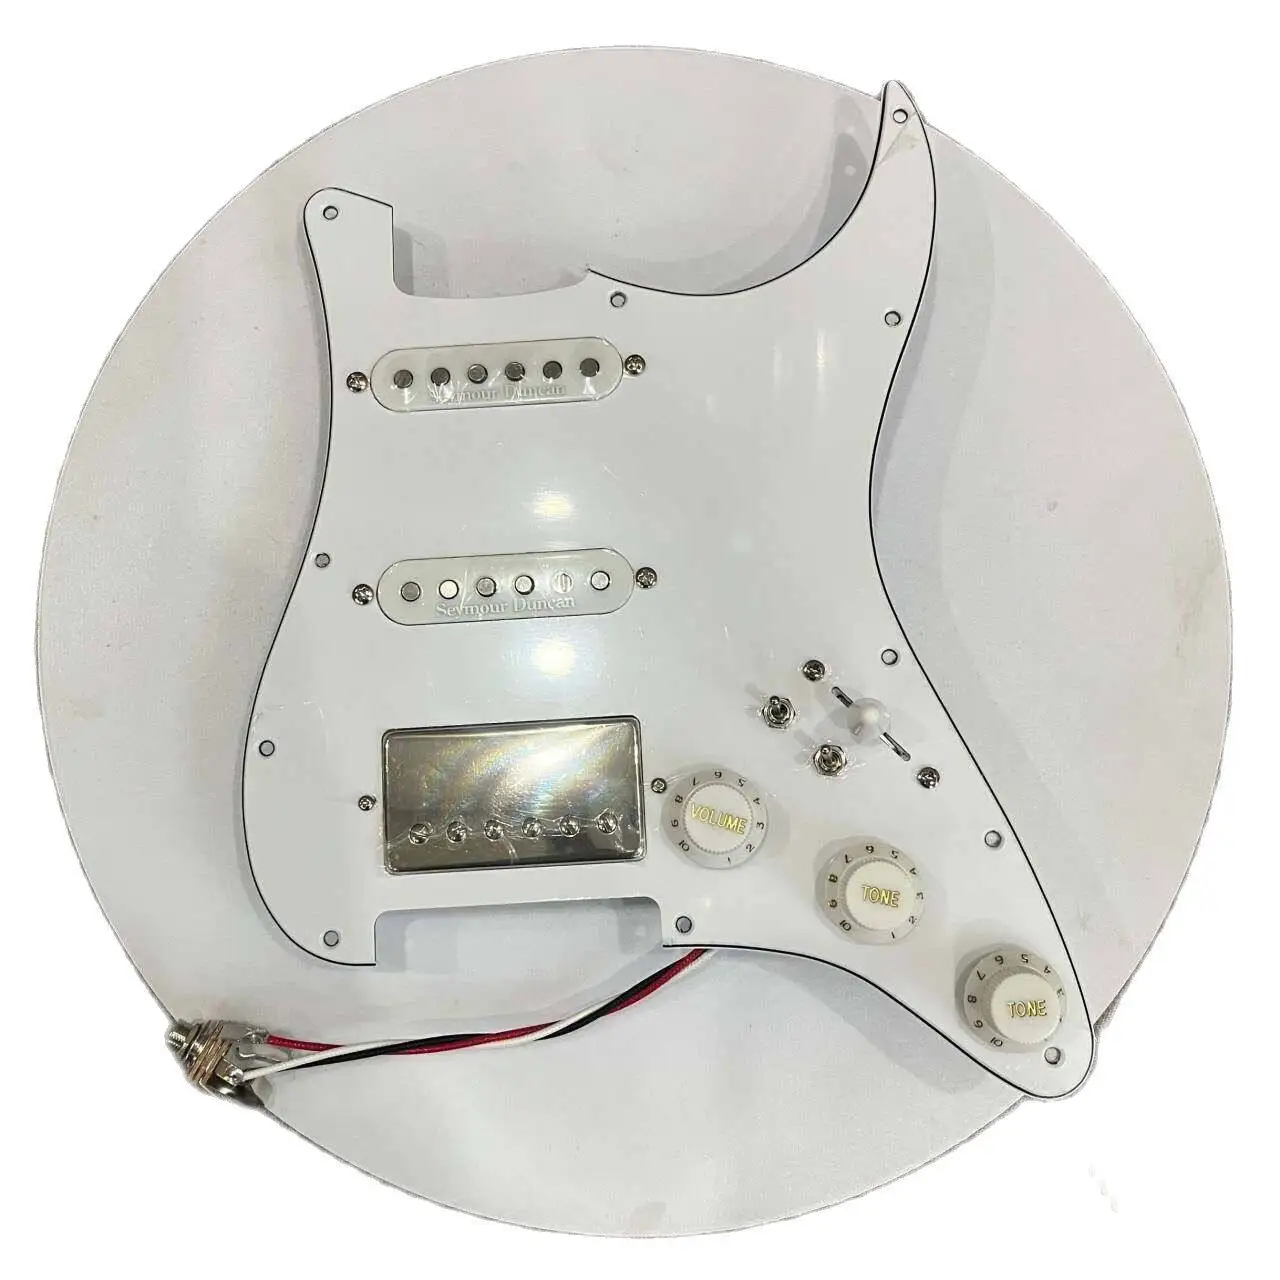 

Upgrade Prewired HSS Pickguard White Seymour Duncan SSL1Single Coil Pickups 1 Set 7 Way Switch Multifunction Wireing Harness